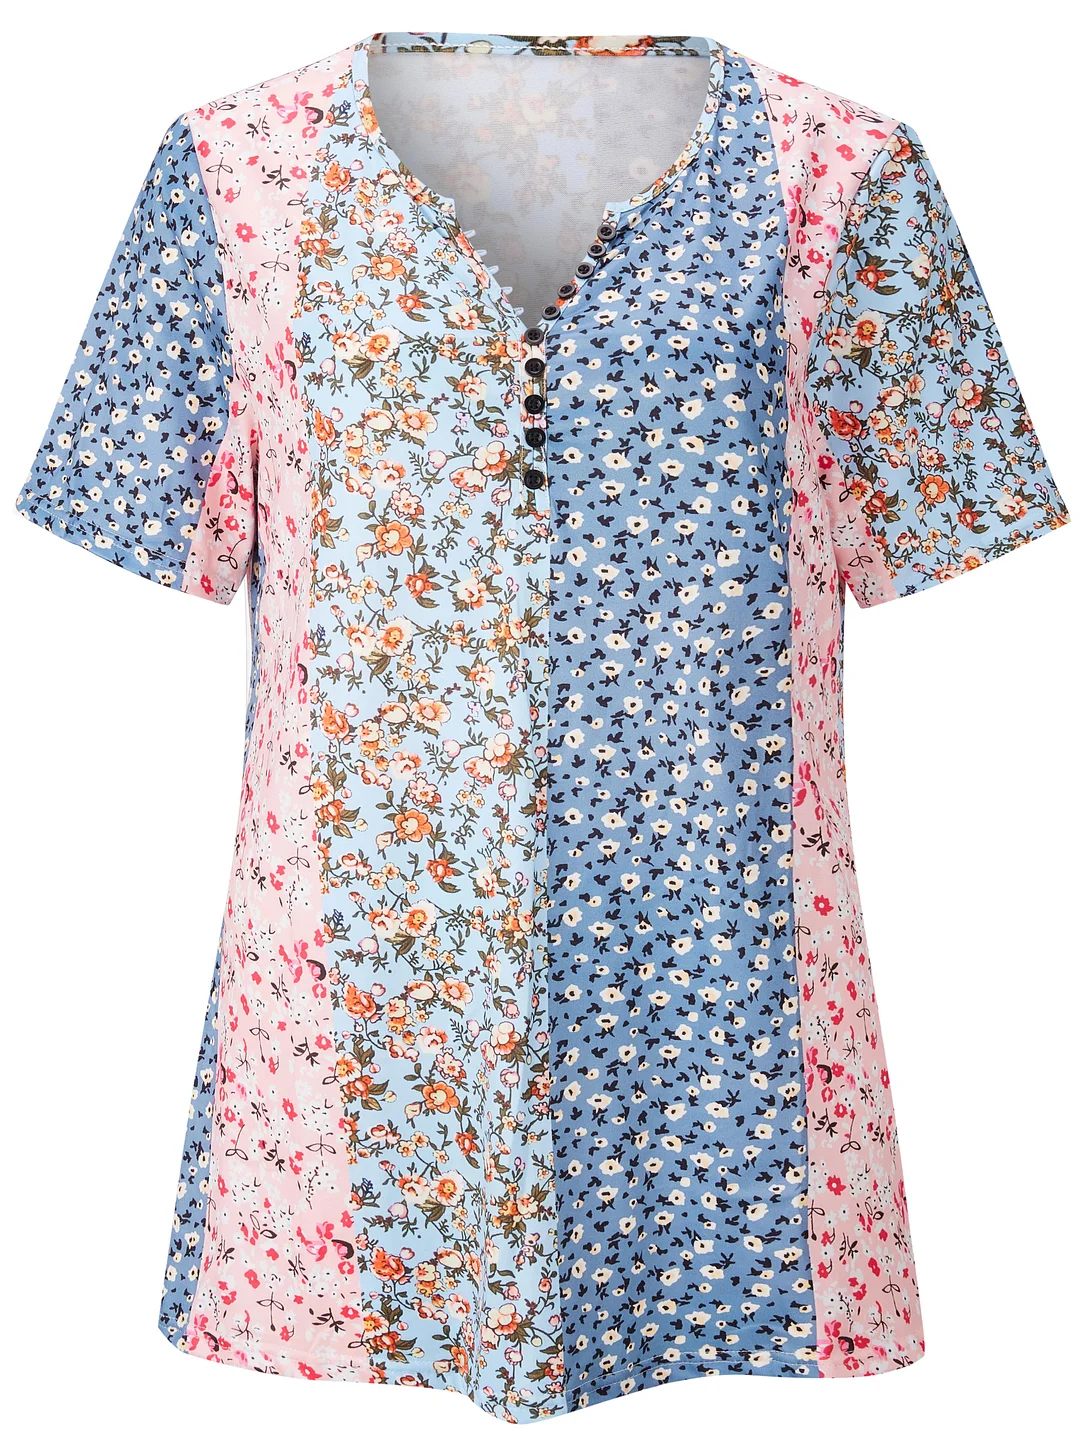 Style & Comfort for Mature Women Women Short Sleeve V-neck Floral Printed Button Tops